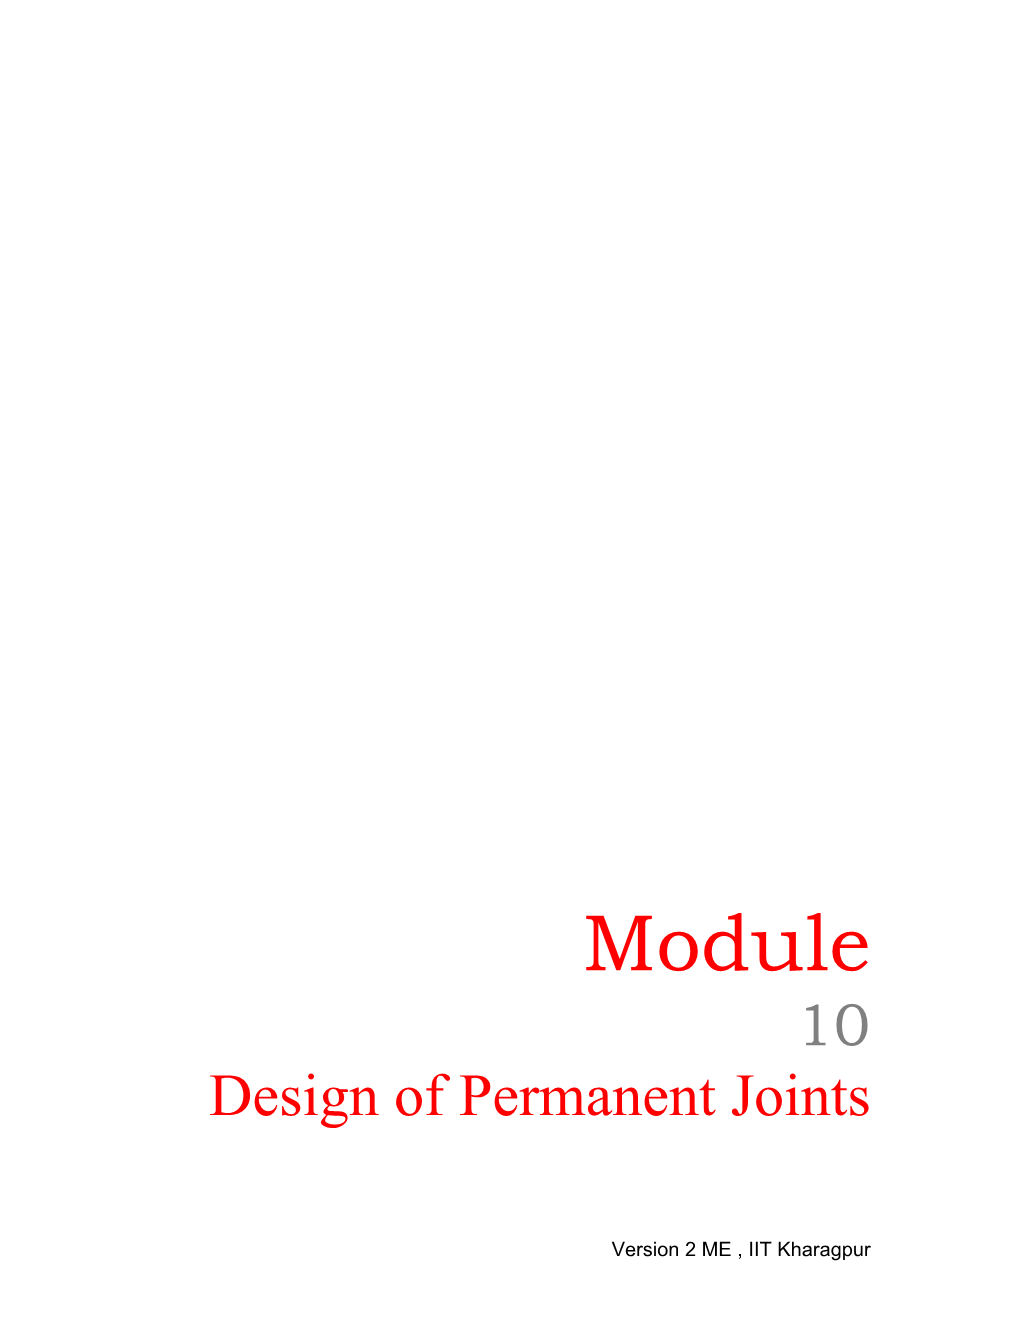 Design of Permanent Joints